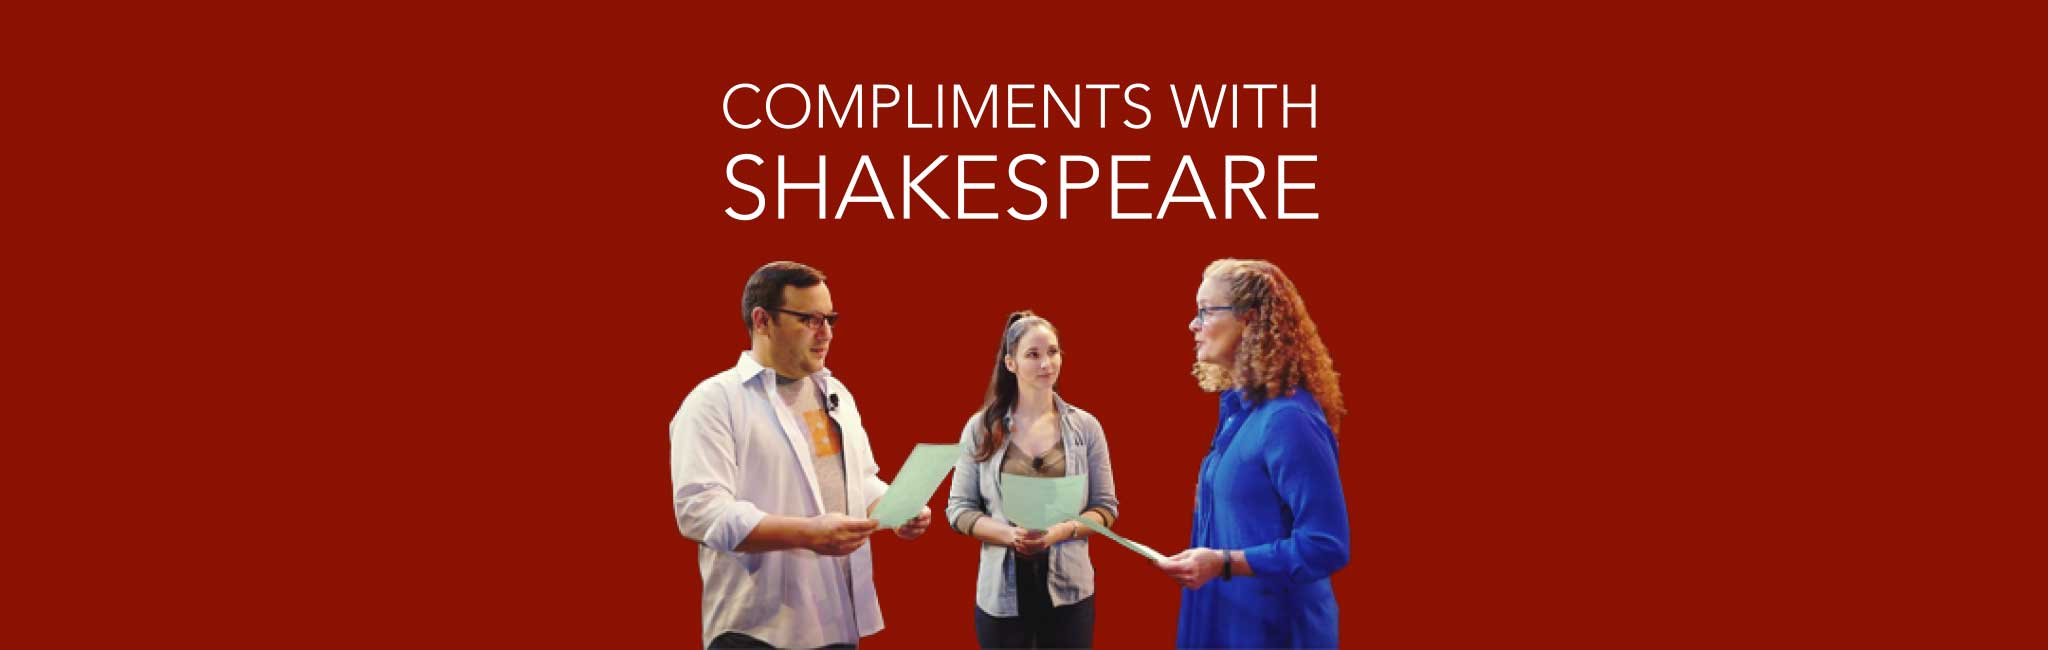 Compliments with Shakespeare